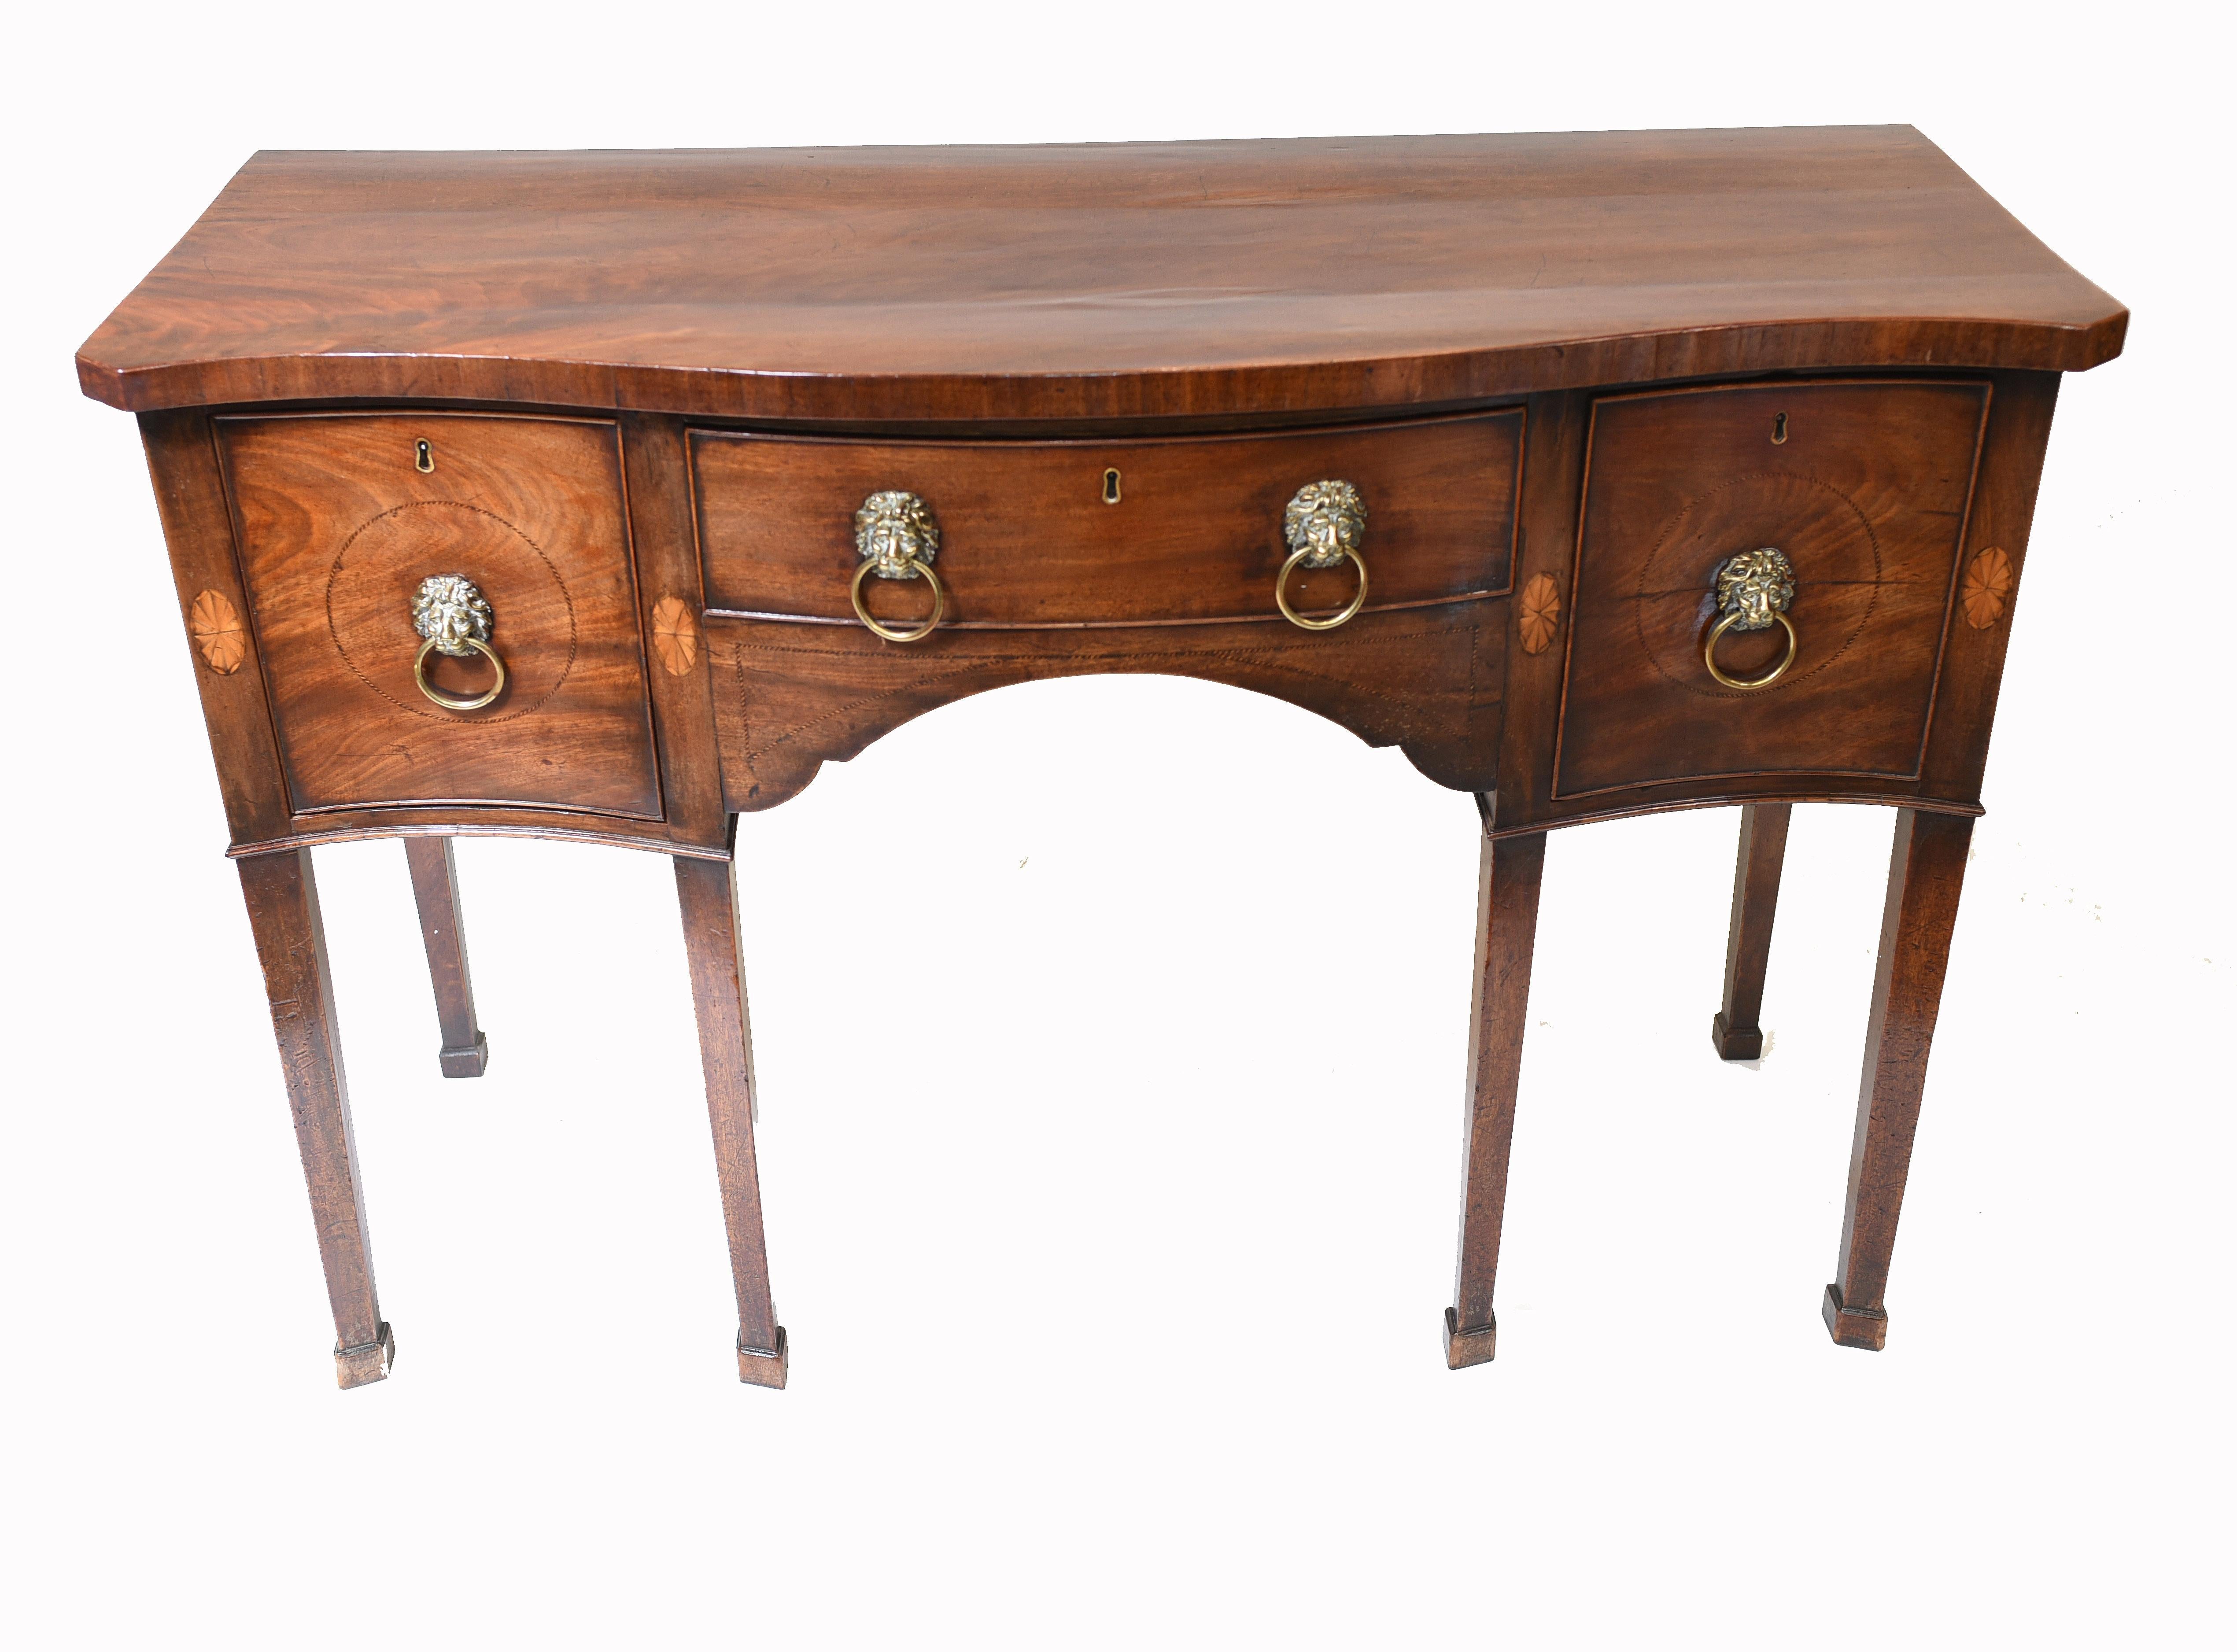 Elegant Georgian sideboard in mahogany
We date this piece to circa 1780
Great condition considering age
Also features original lion mask ring handles, a classic Georgian design motif
Viewings available by appointment
Offered in great shape